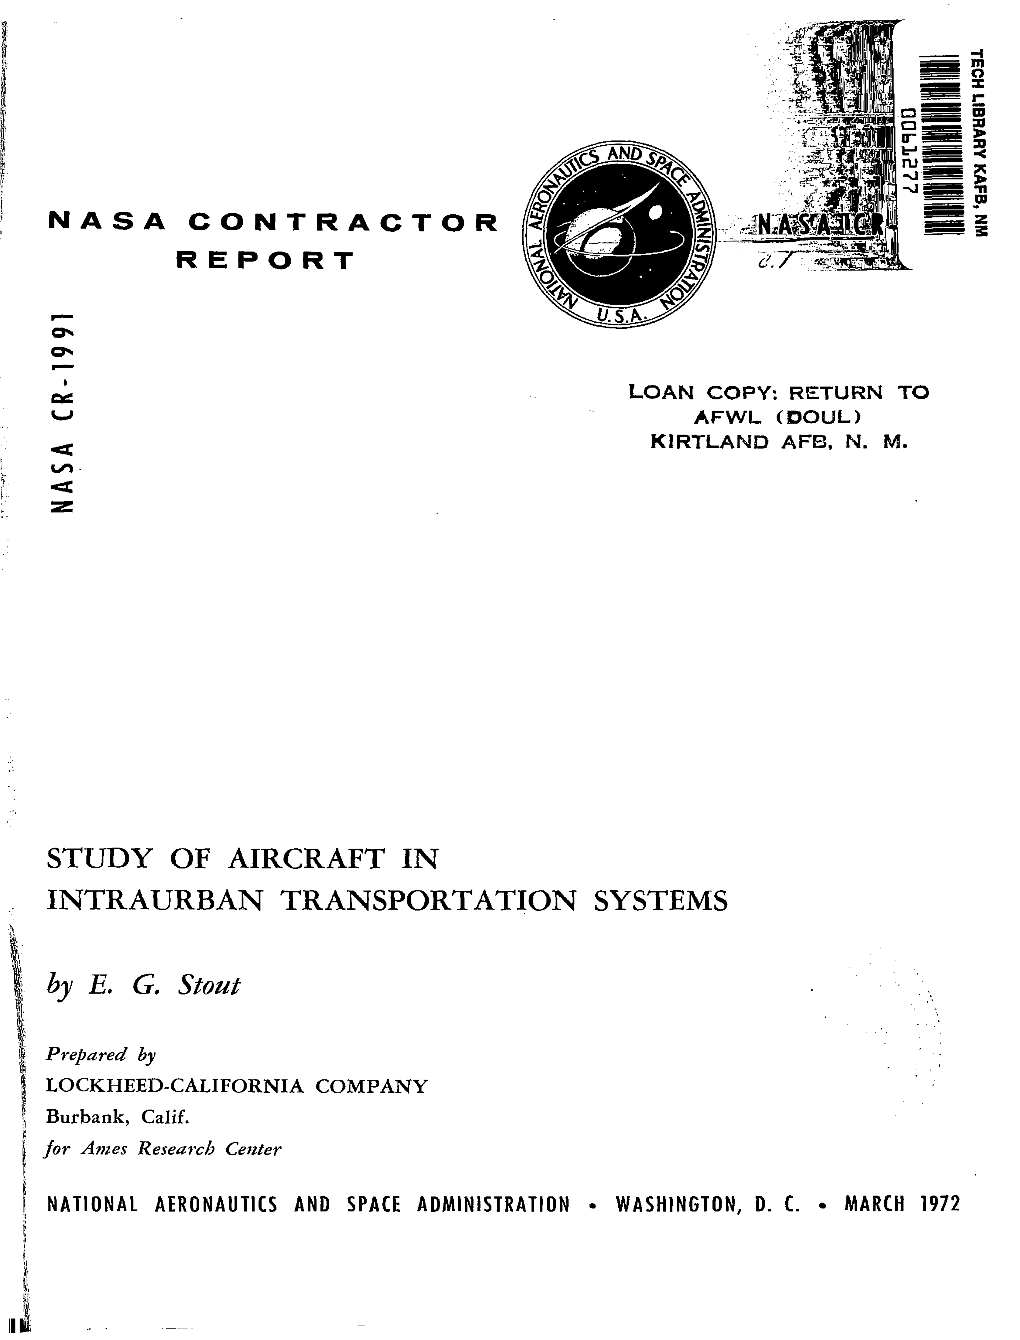 Study of Aircraft in Intraurban Transportation Systens" I 6